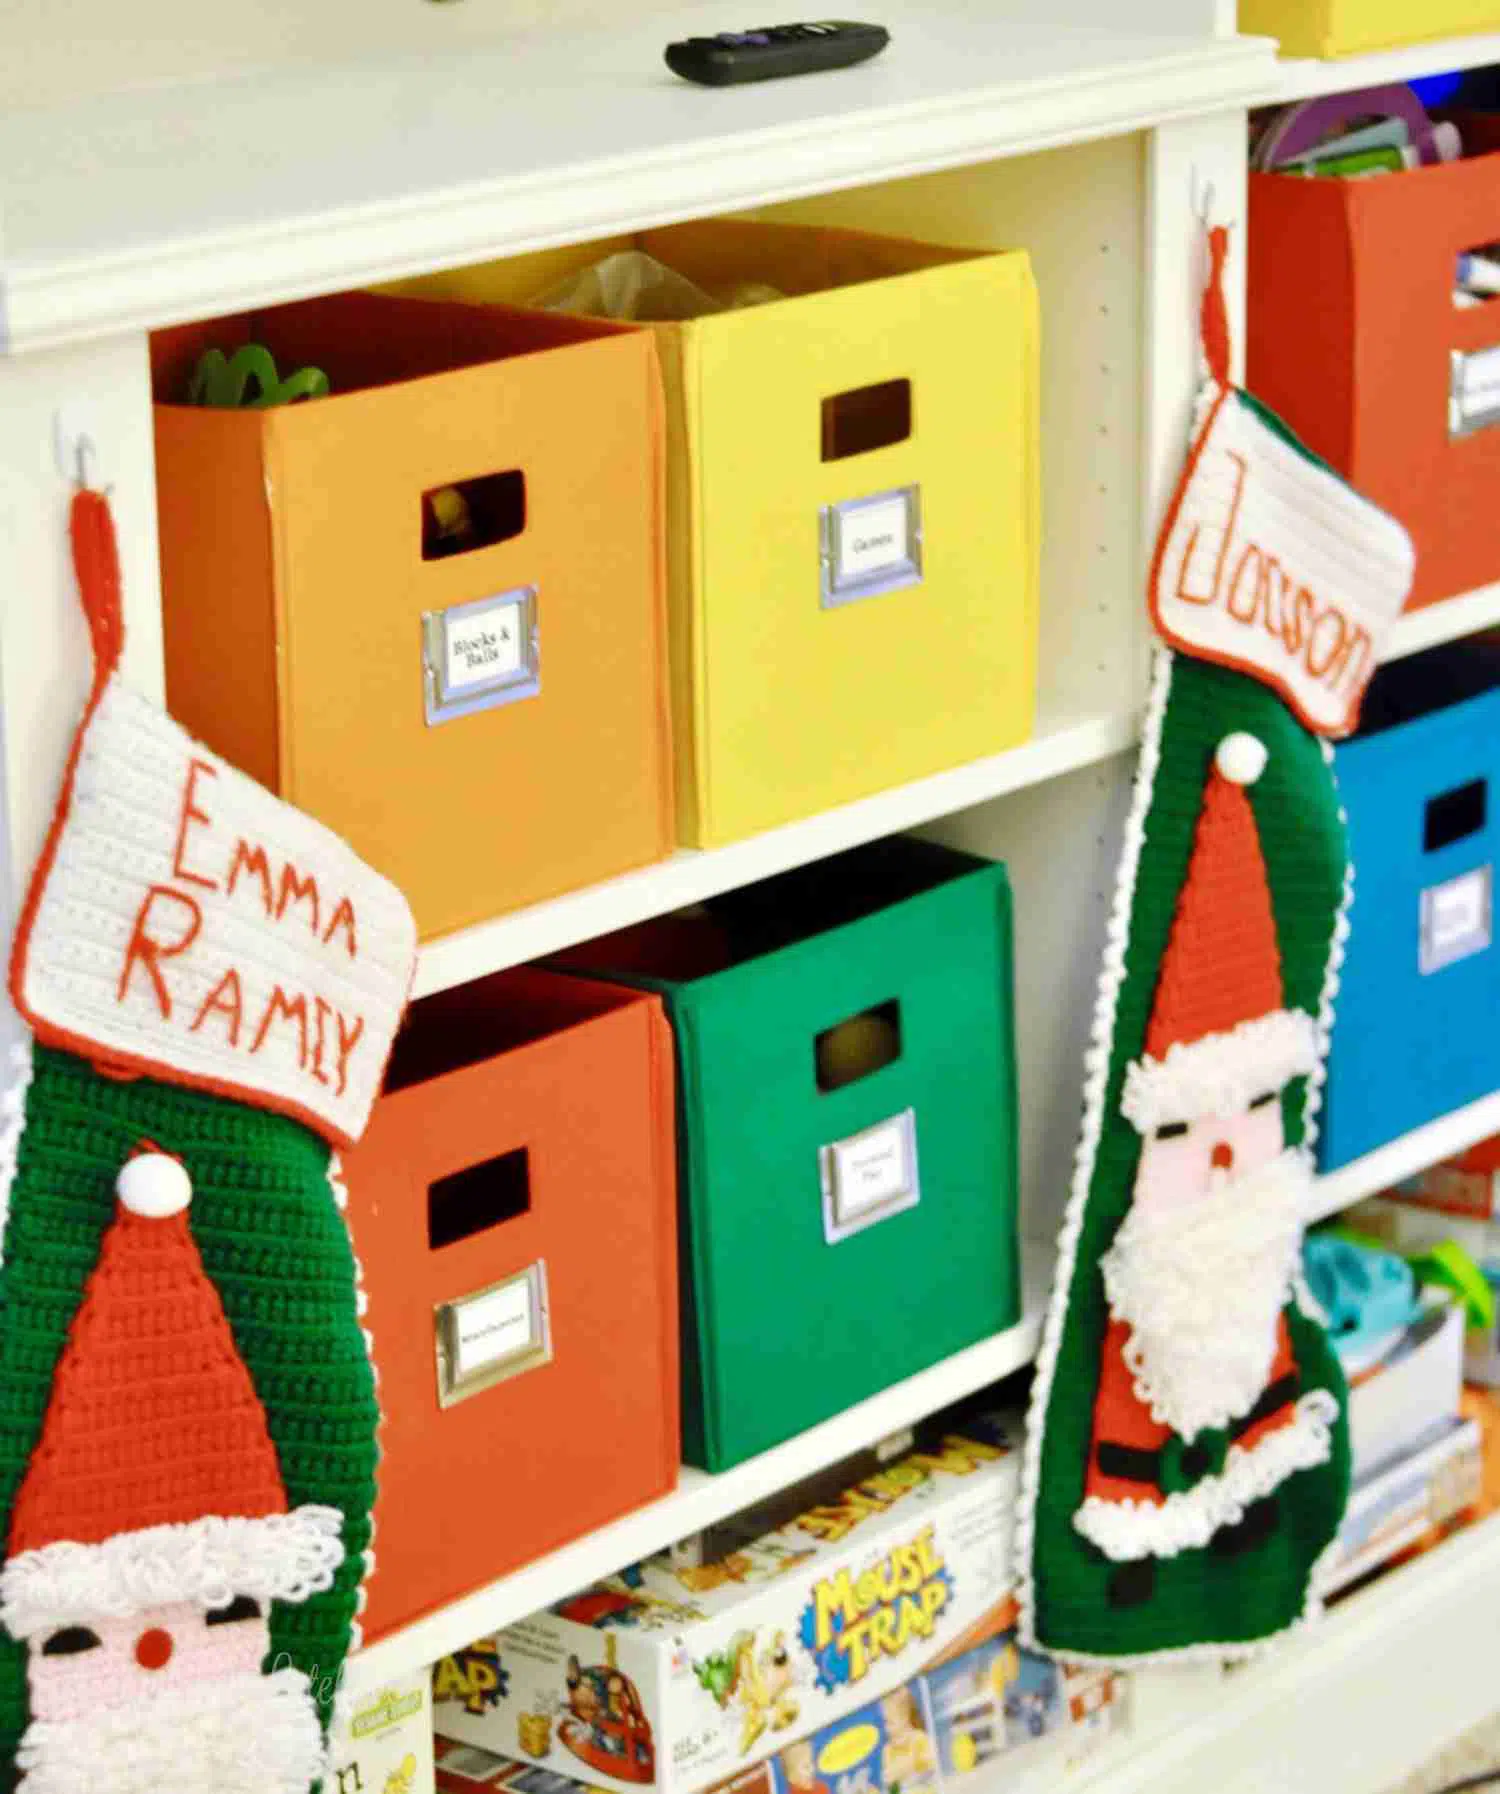 colorful bins on white shelves, with stockings hanging.